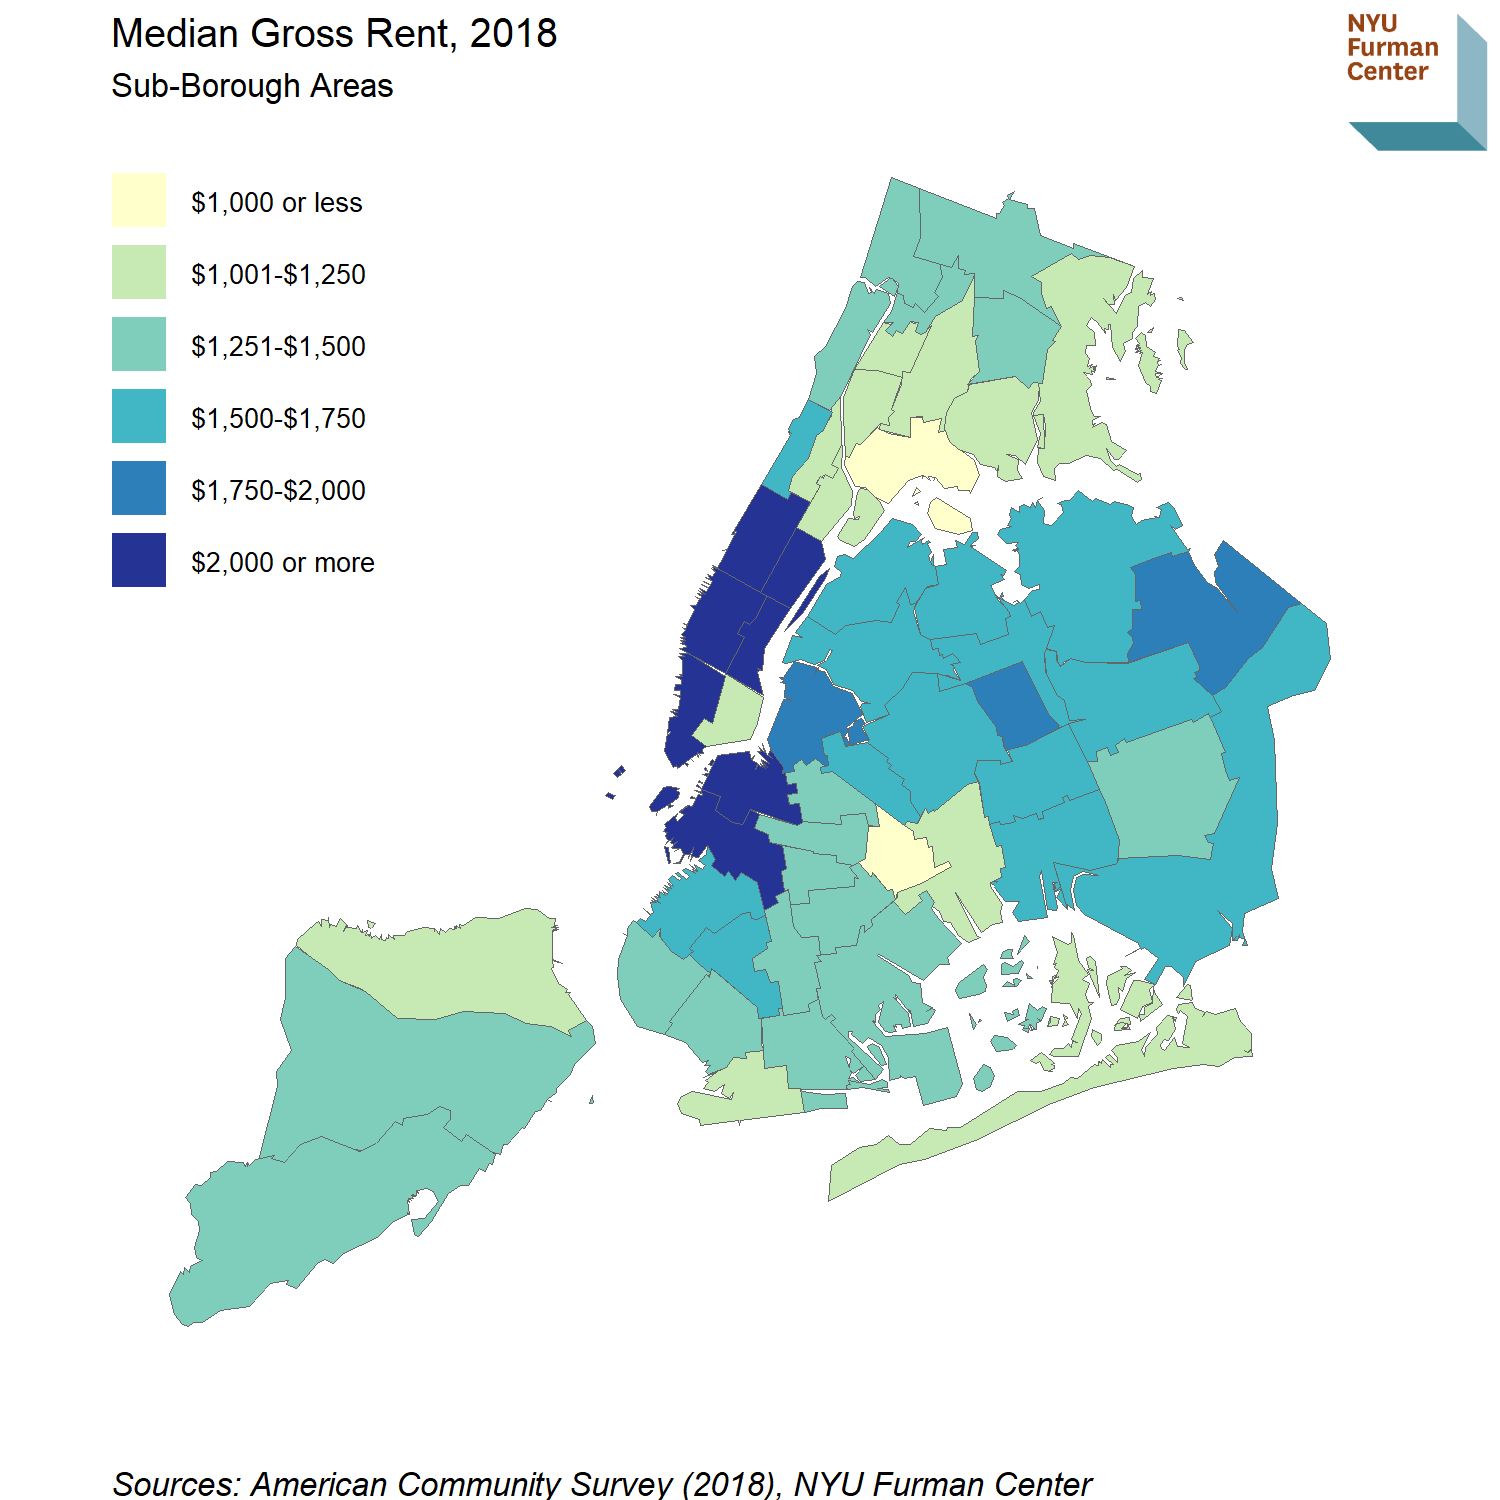 Choropleth map showing  NYC median rent by Sub-Borough Area